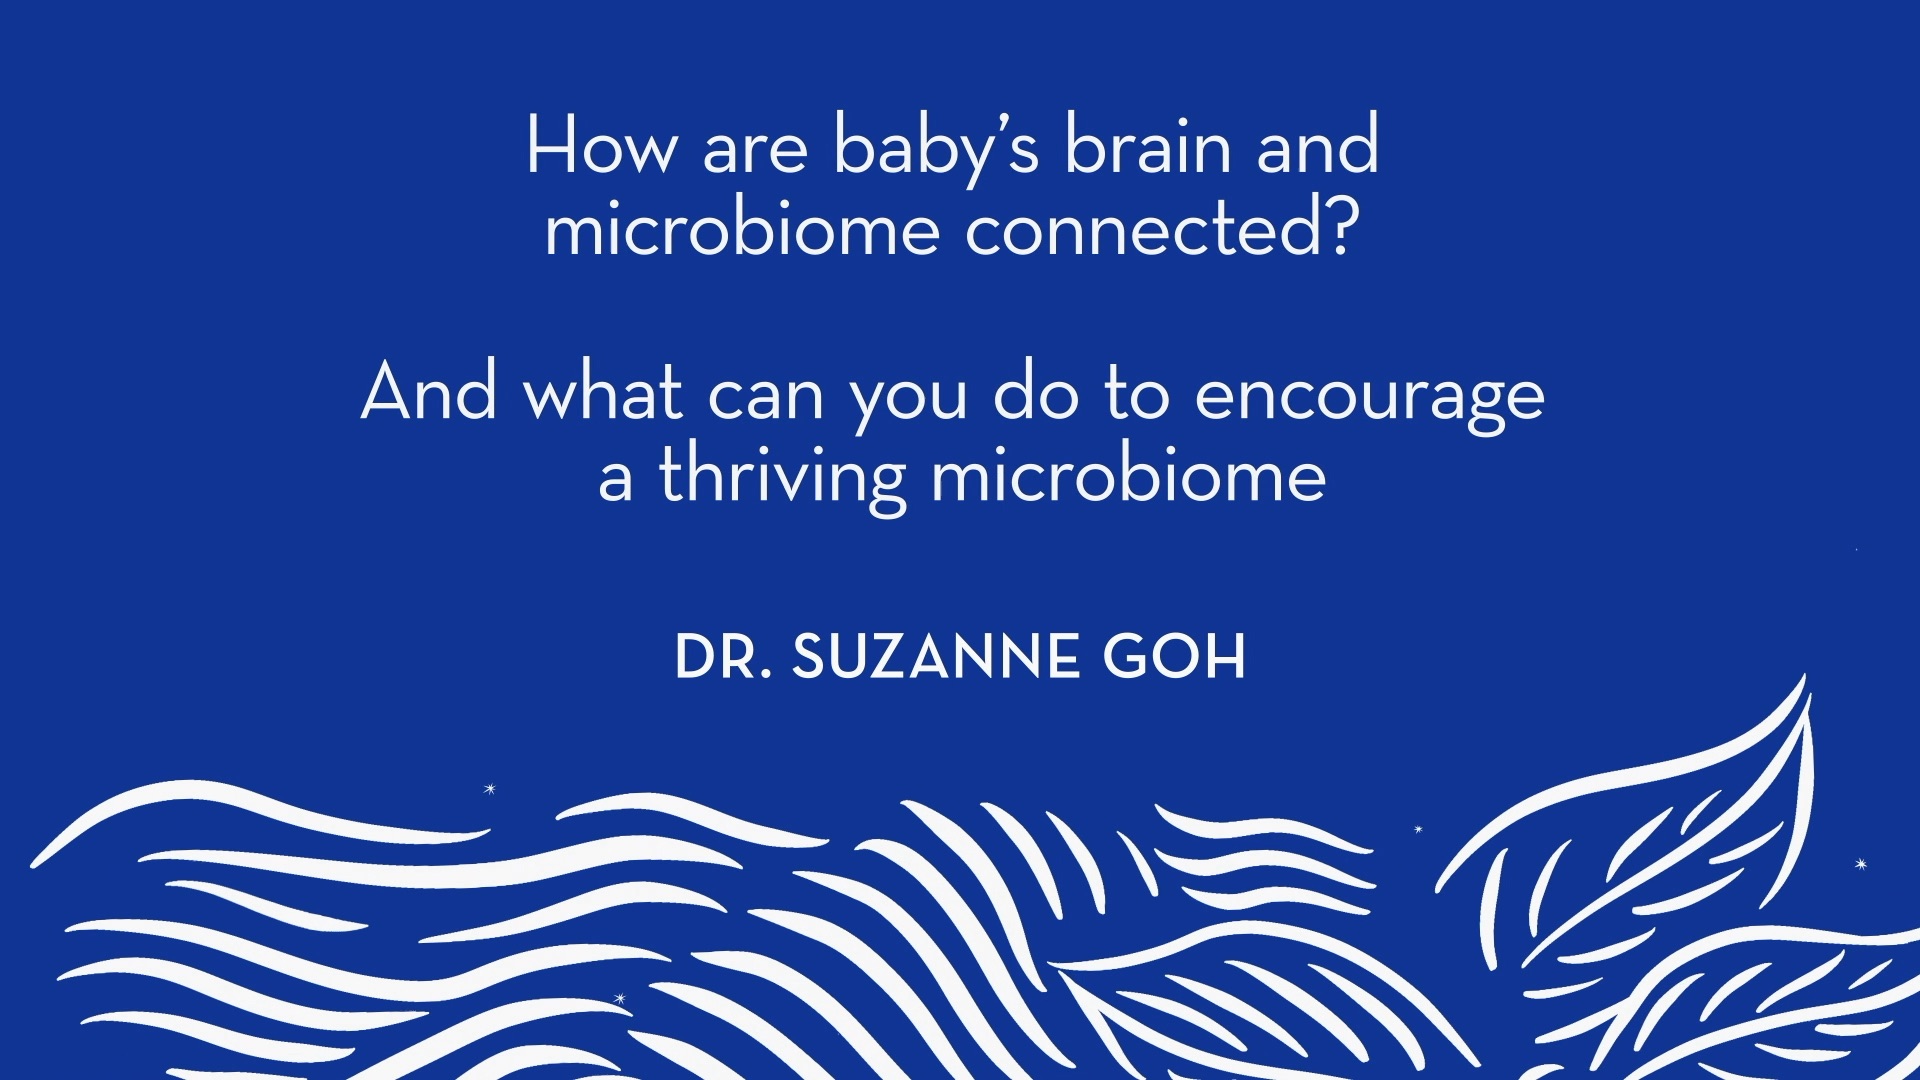 Dr. Goh | How are baby's brain and microbiome connected? And what you can do to encourage a thriving microbiome